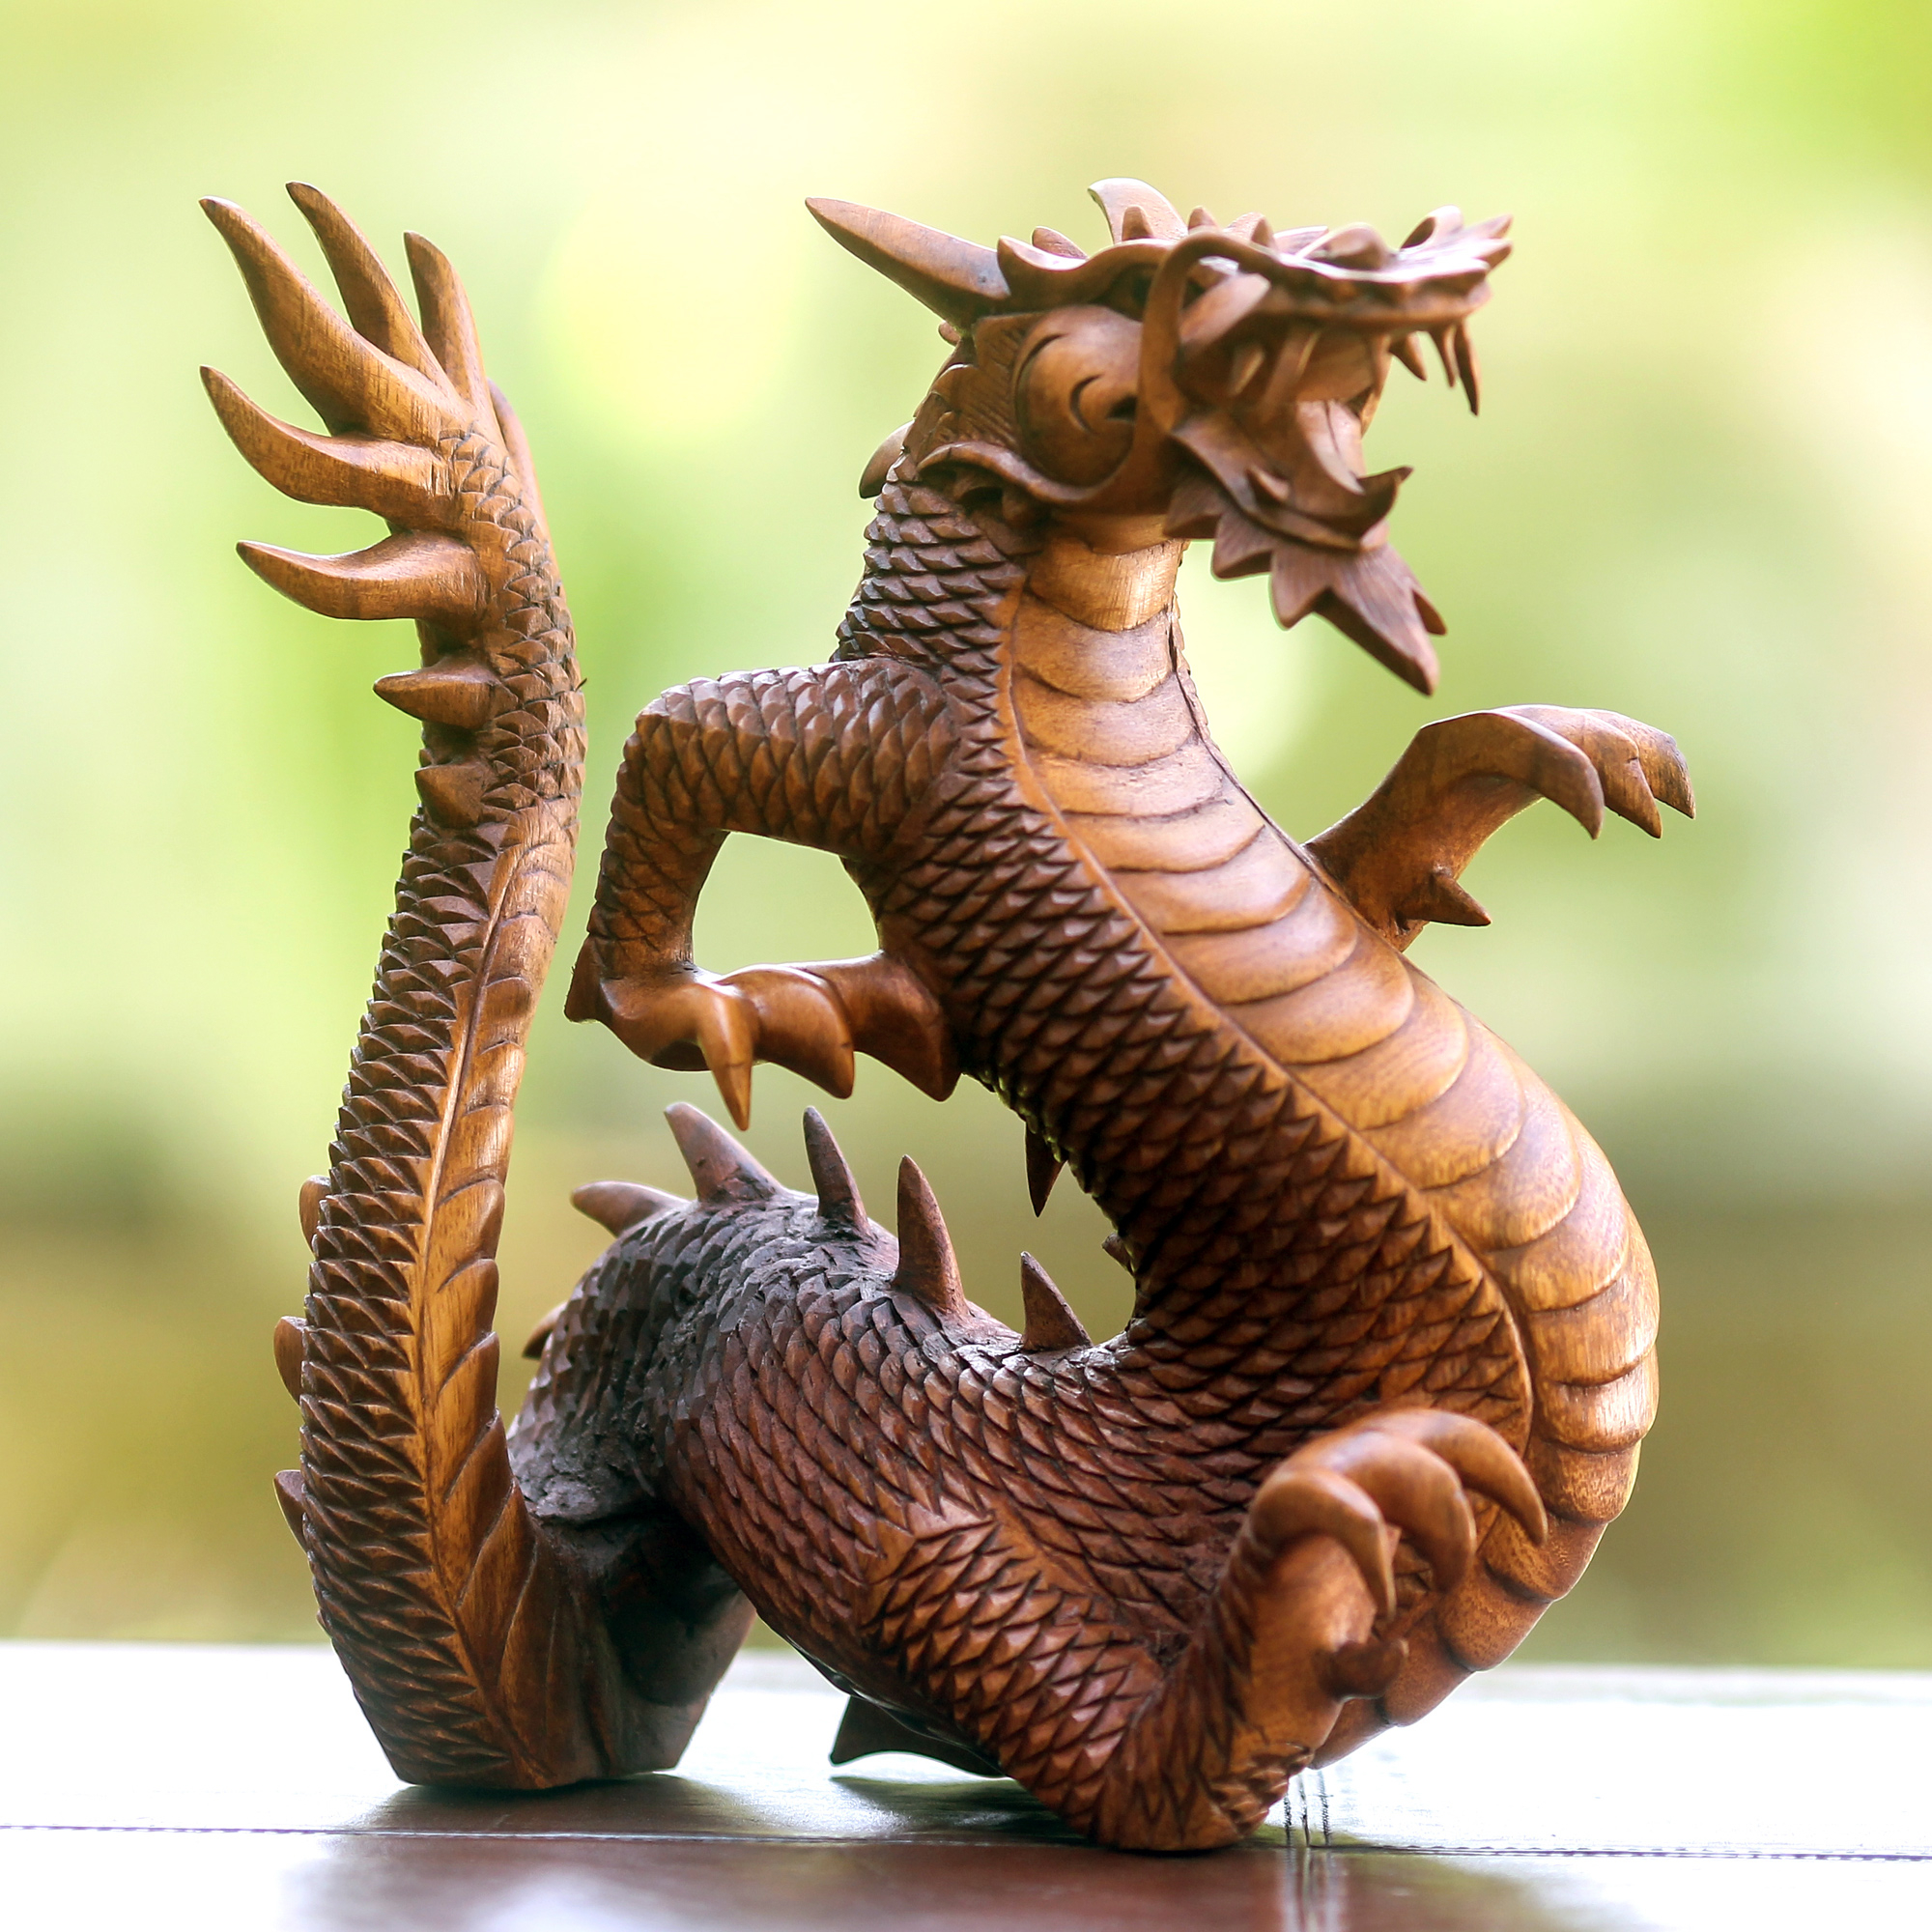 Suar Wood Carving from Indonesia, 'Legendary Dragon